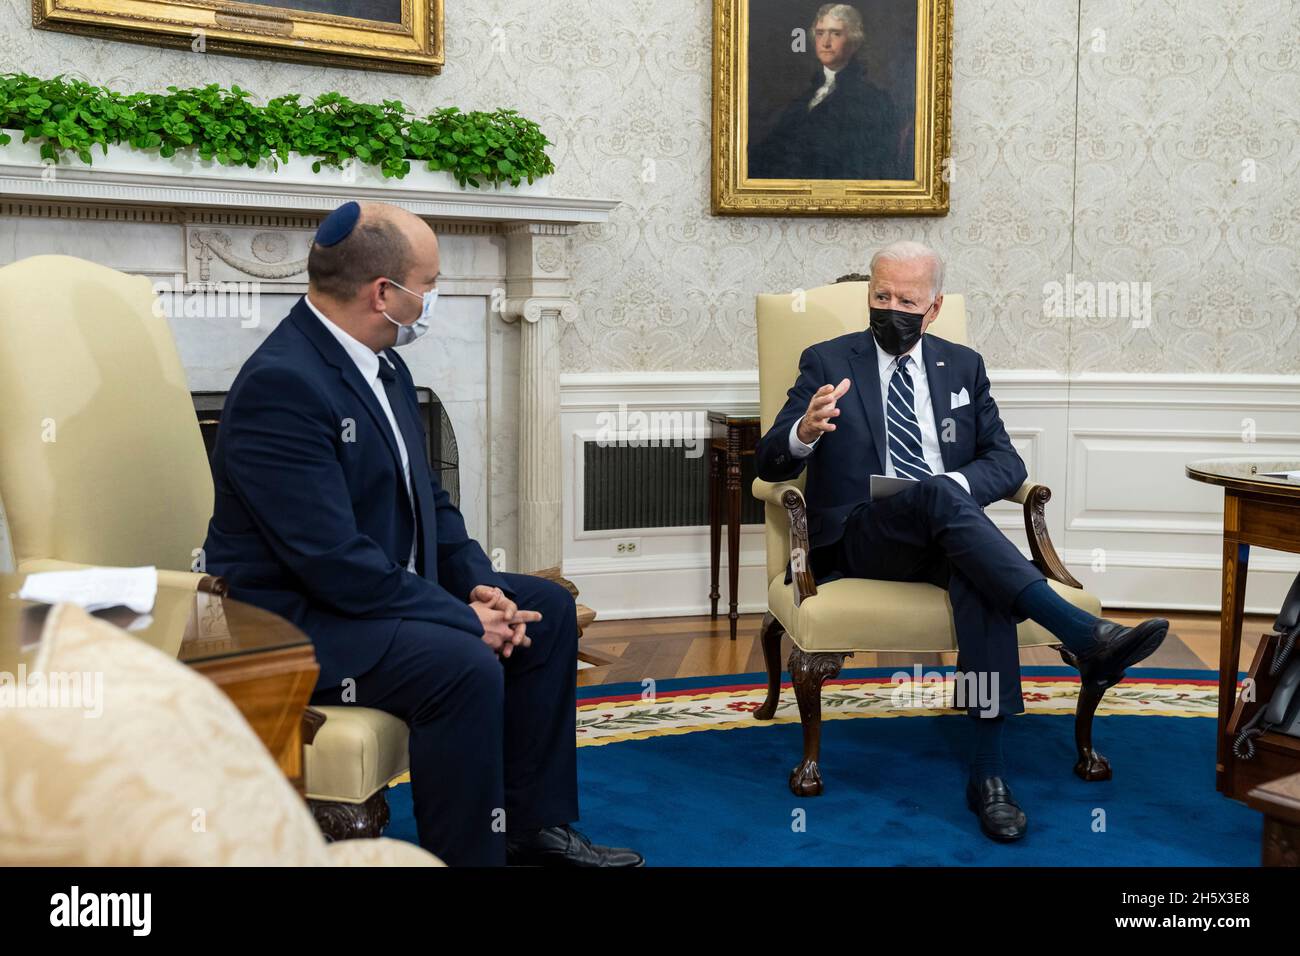 Washington, United States. 27 August, 2021. U.S. President Joe Biden during a bilateral meeting with Israeli Prime Minister Naftali Bennett, in the Oval Office of the White House August 27, 2021 in Washington, D.C. Credit: Adam Schultz/White House Photo/Alamy Live News Stock Photo